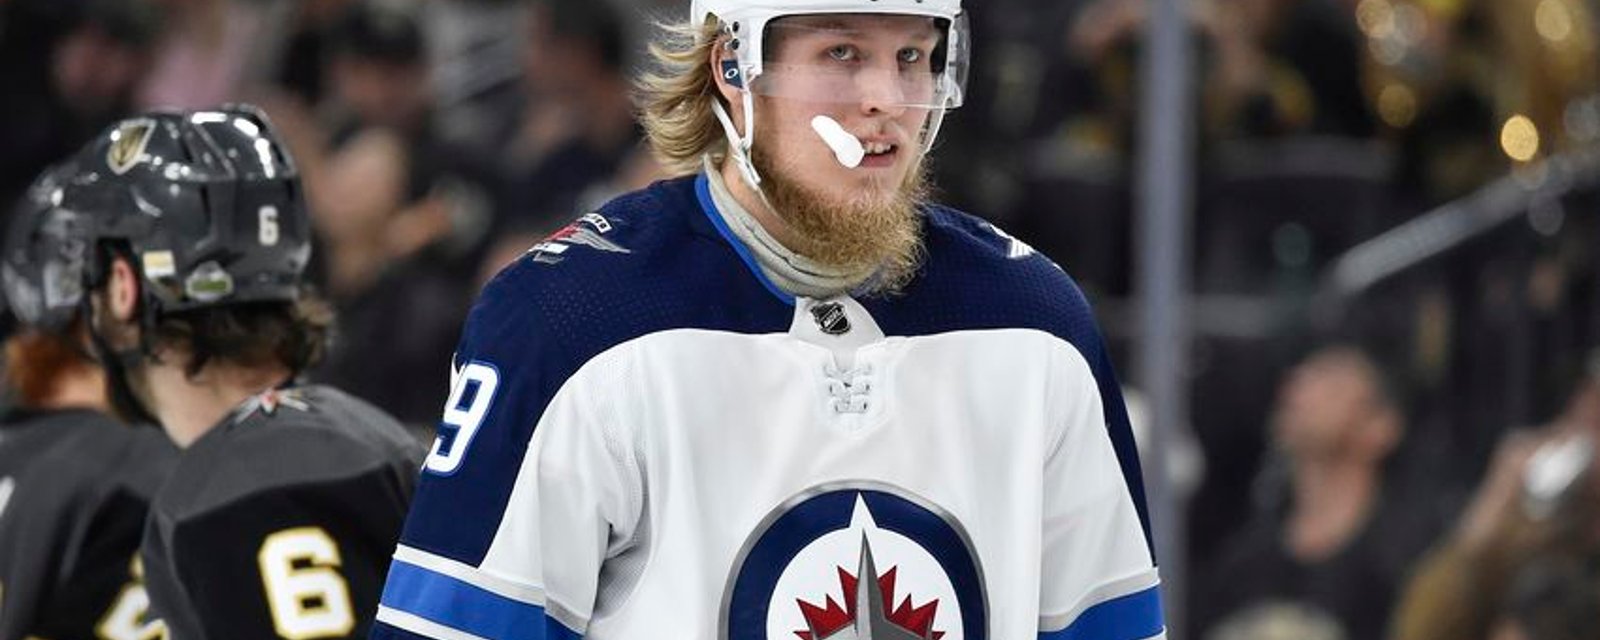 Laine outrages fans when asked about ongoing slump!